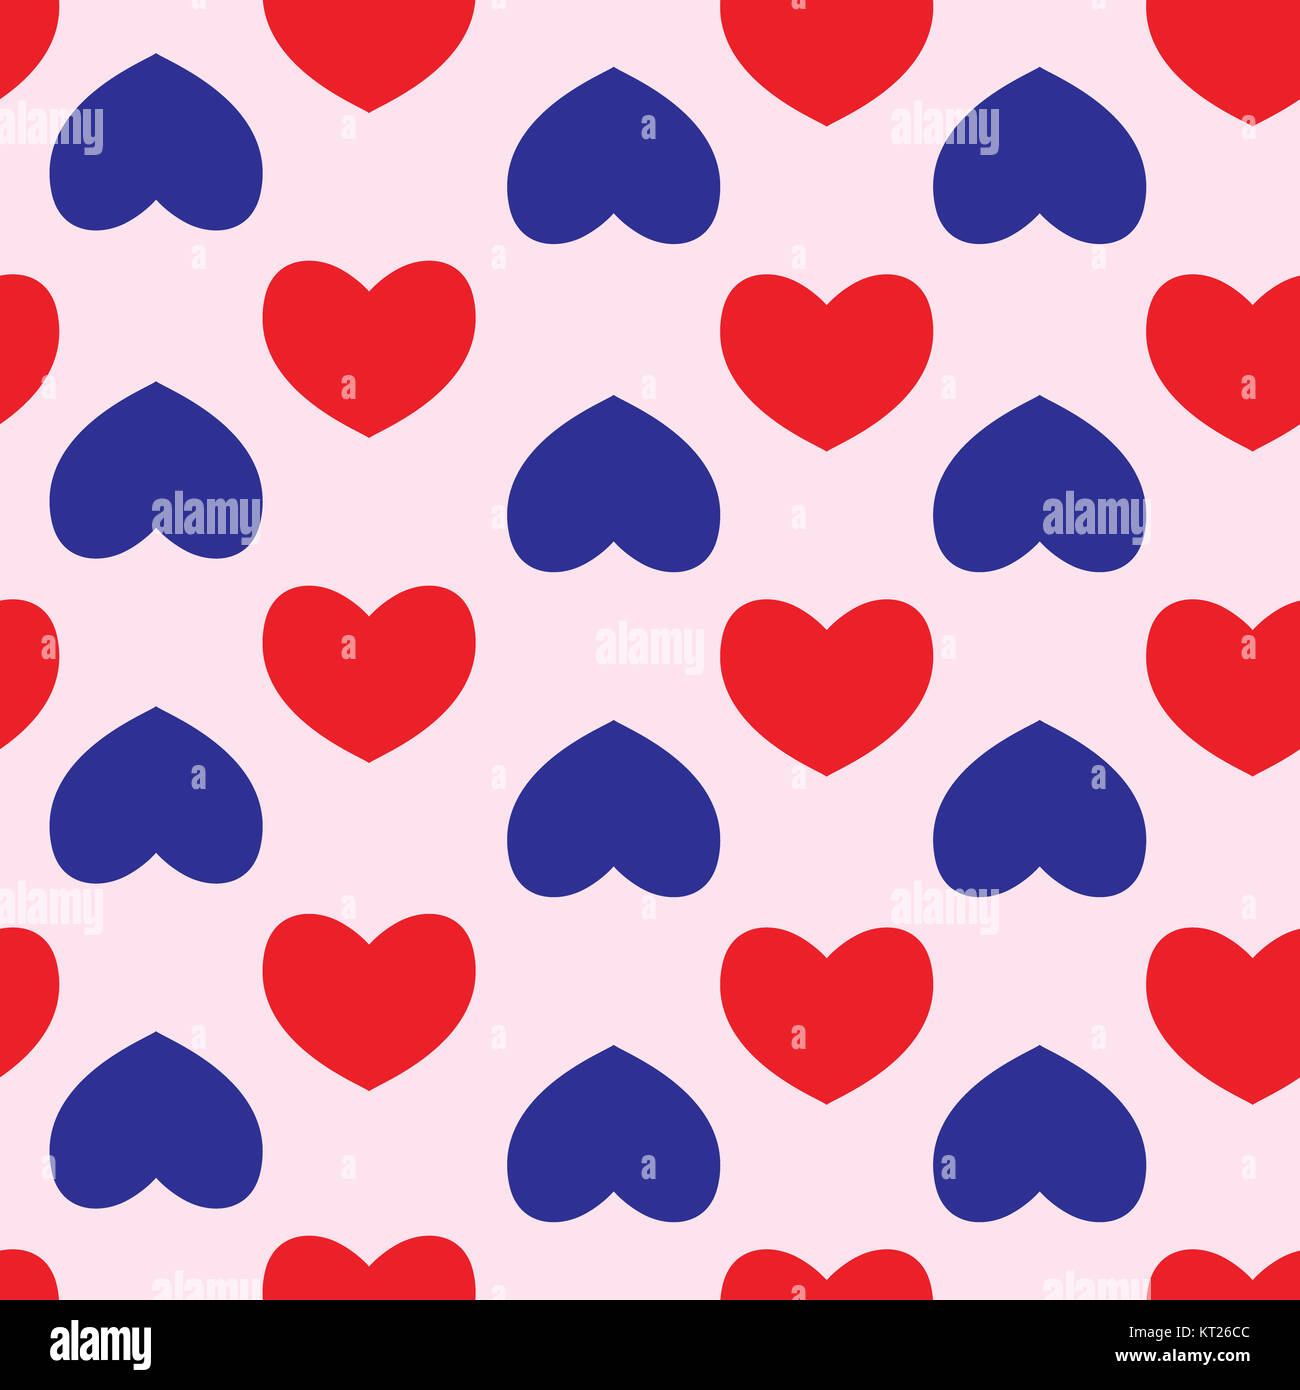 Cute seamless vector illustration pattern with blue hearts and